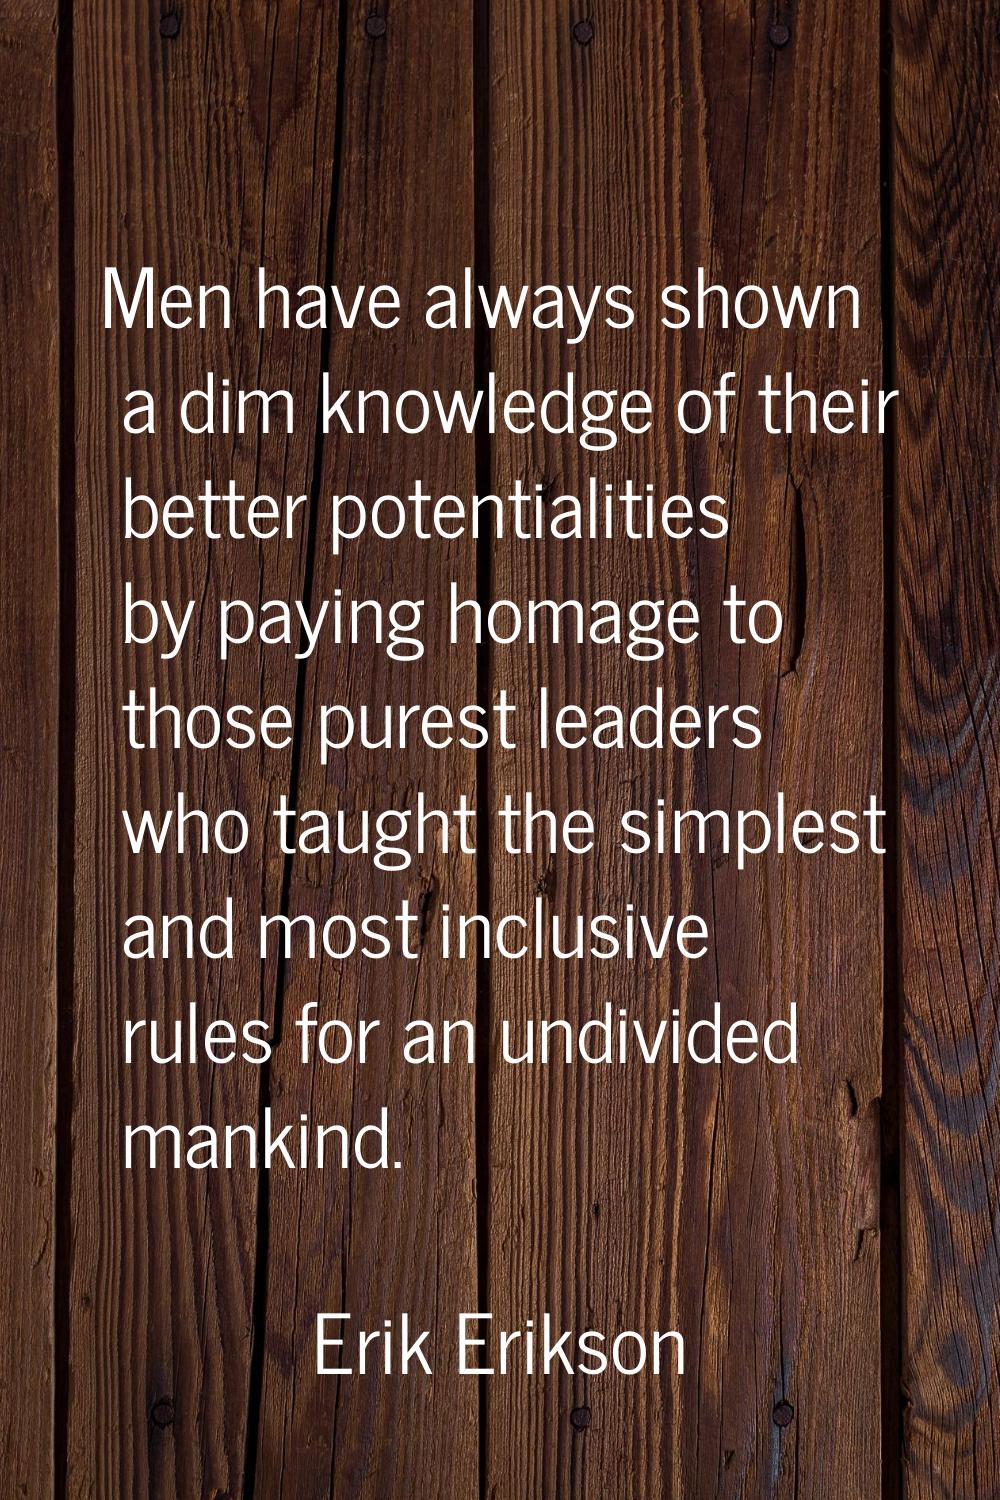 Men have always shown a dim knowledge of their better potentialities by paying homage to those pure